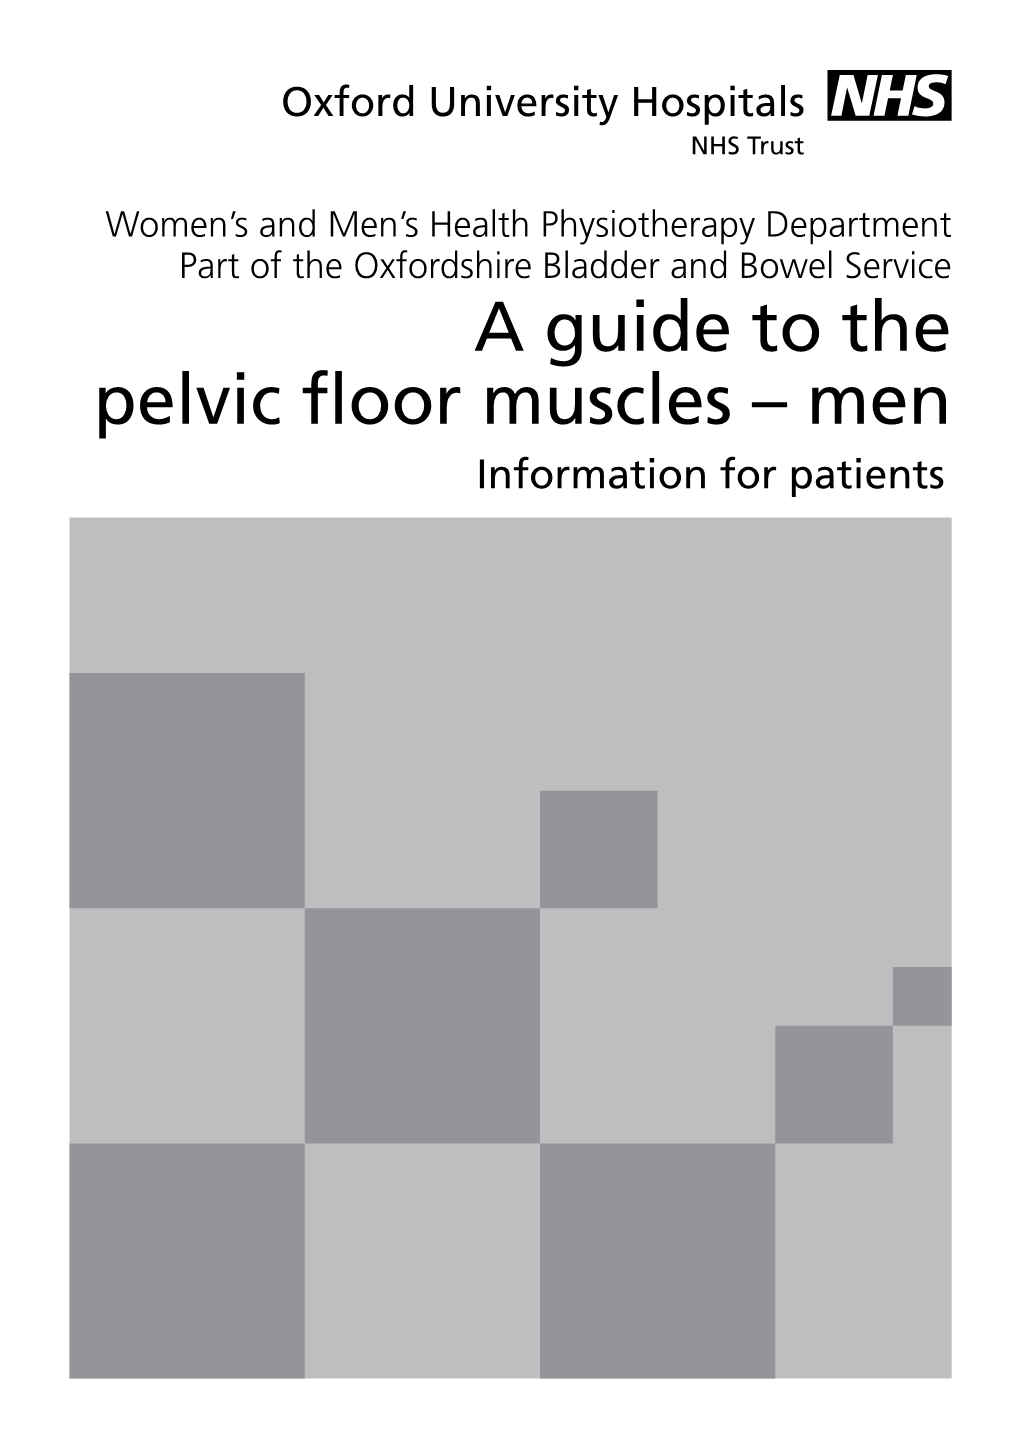 A Guide to the Pelvic Floor Muscles – Men Information for Patients Introduction Many Men Suffer from Weakness of Their Pelvic Floor Muscles